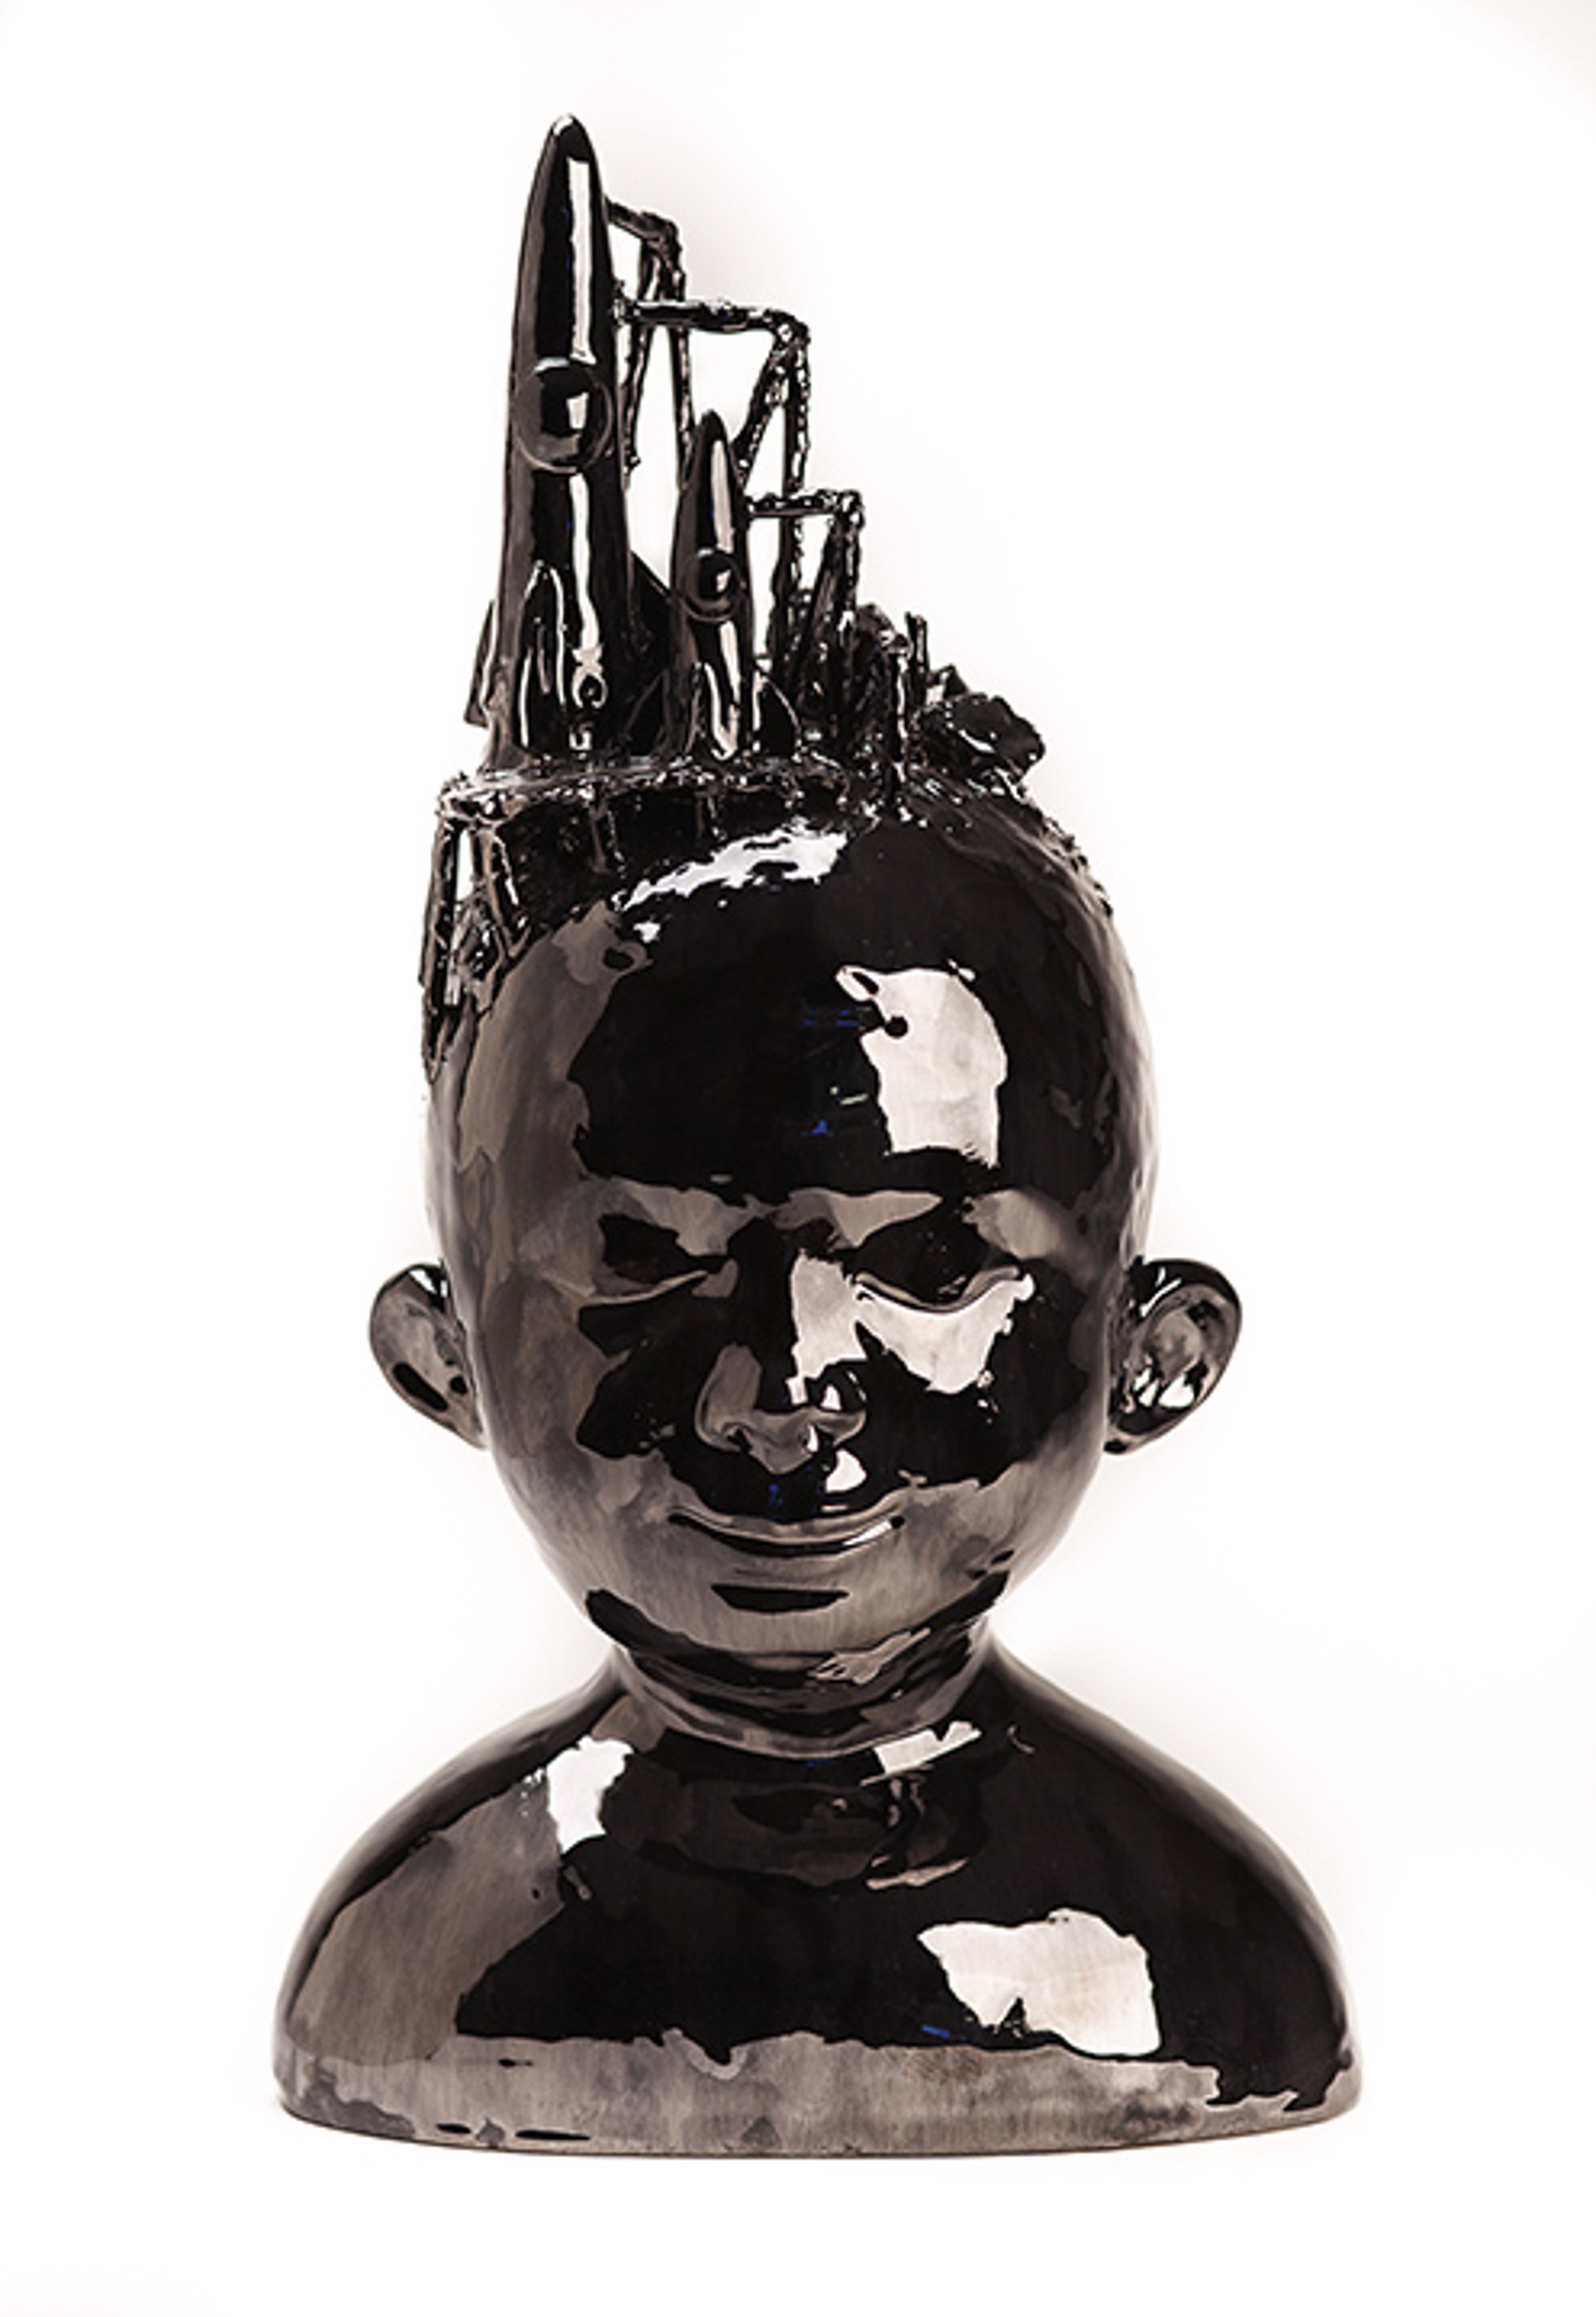 HEAD OF BOY WITH ROCKETS by Jacob Foran